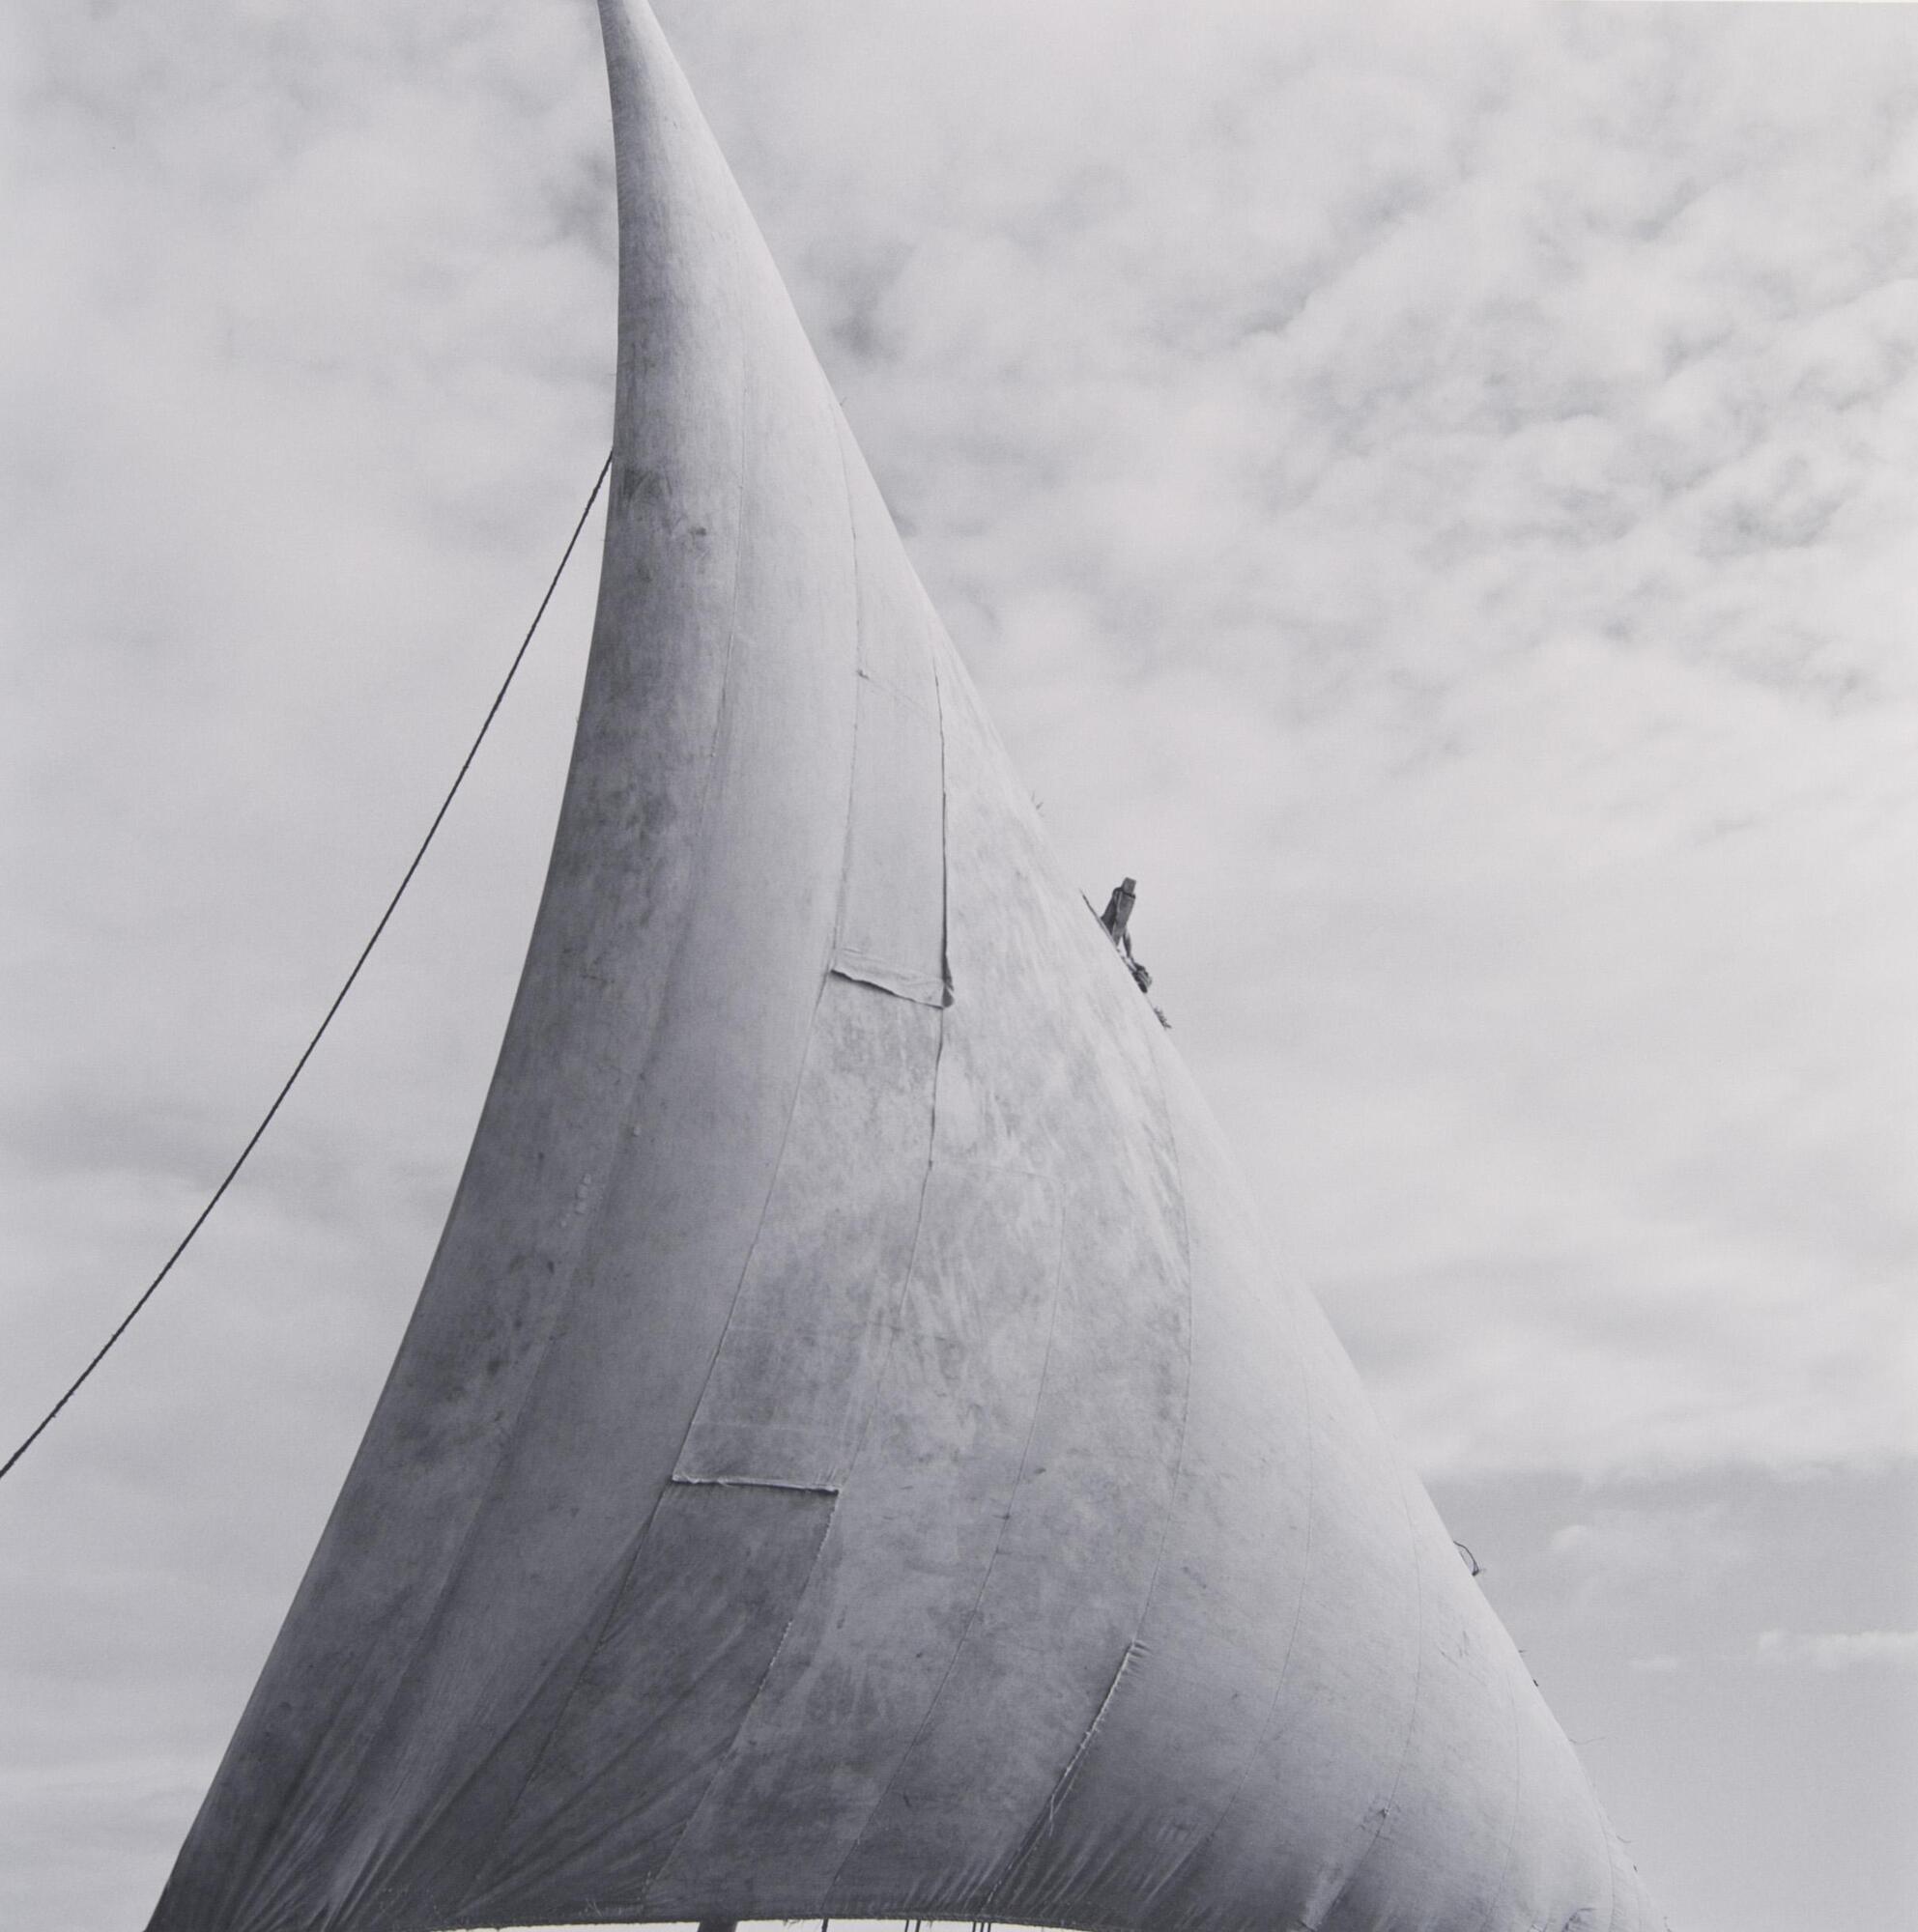 A large ship sail against a cloud-filled sky in Kenya. The angle from which the photograph was taken creates a triangular shape to the sail. From the top corner to the left edge of the photo is a rope, and on the right side of the sail is a small black figure protruding from behind the cloth, possibly the top of the mast to which the sail is connected.